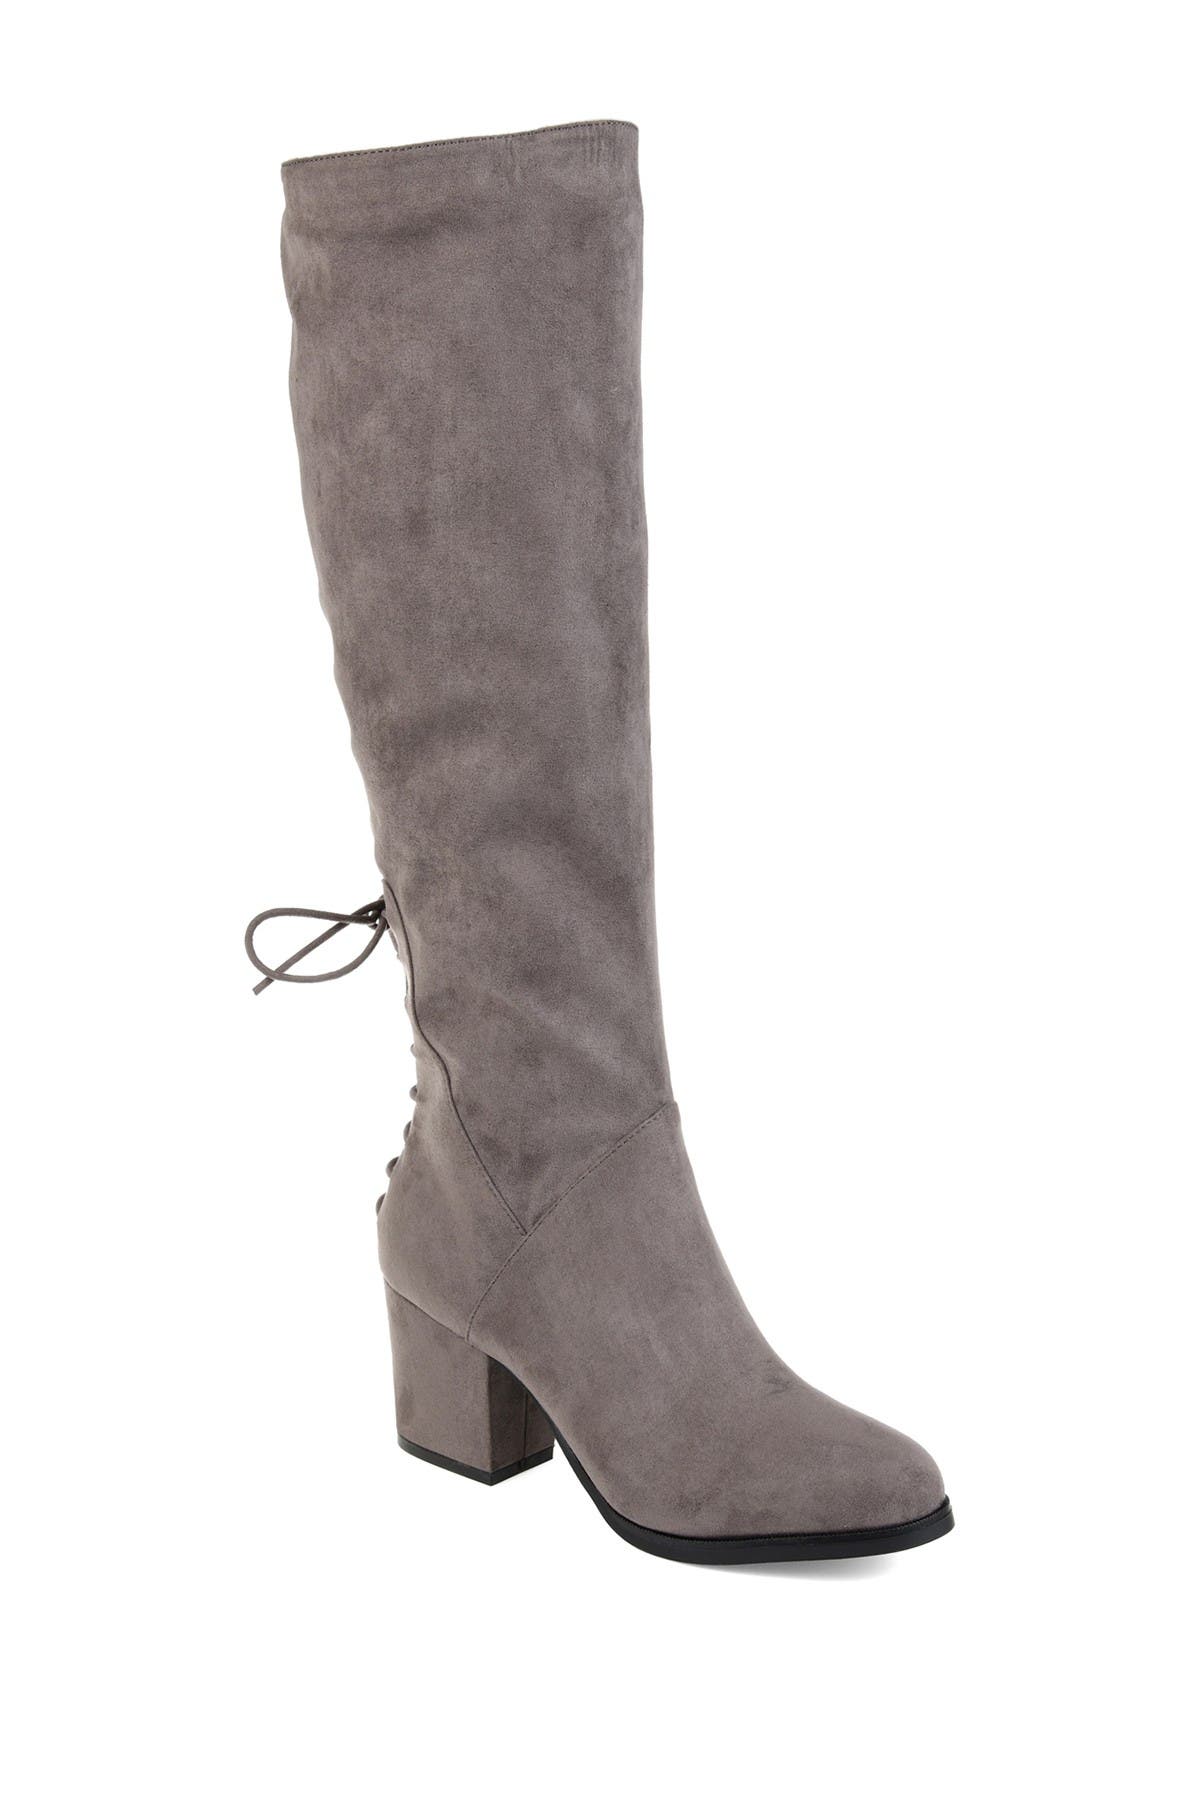 extra wide calf boots with heels